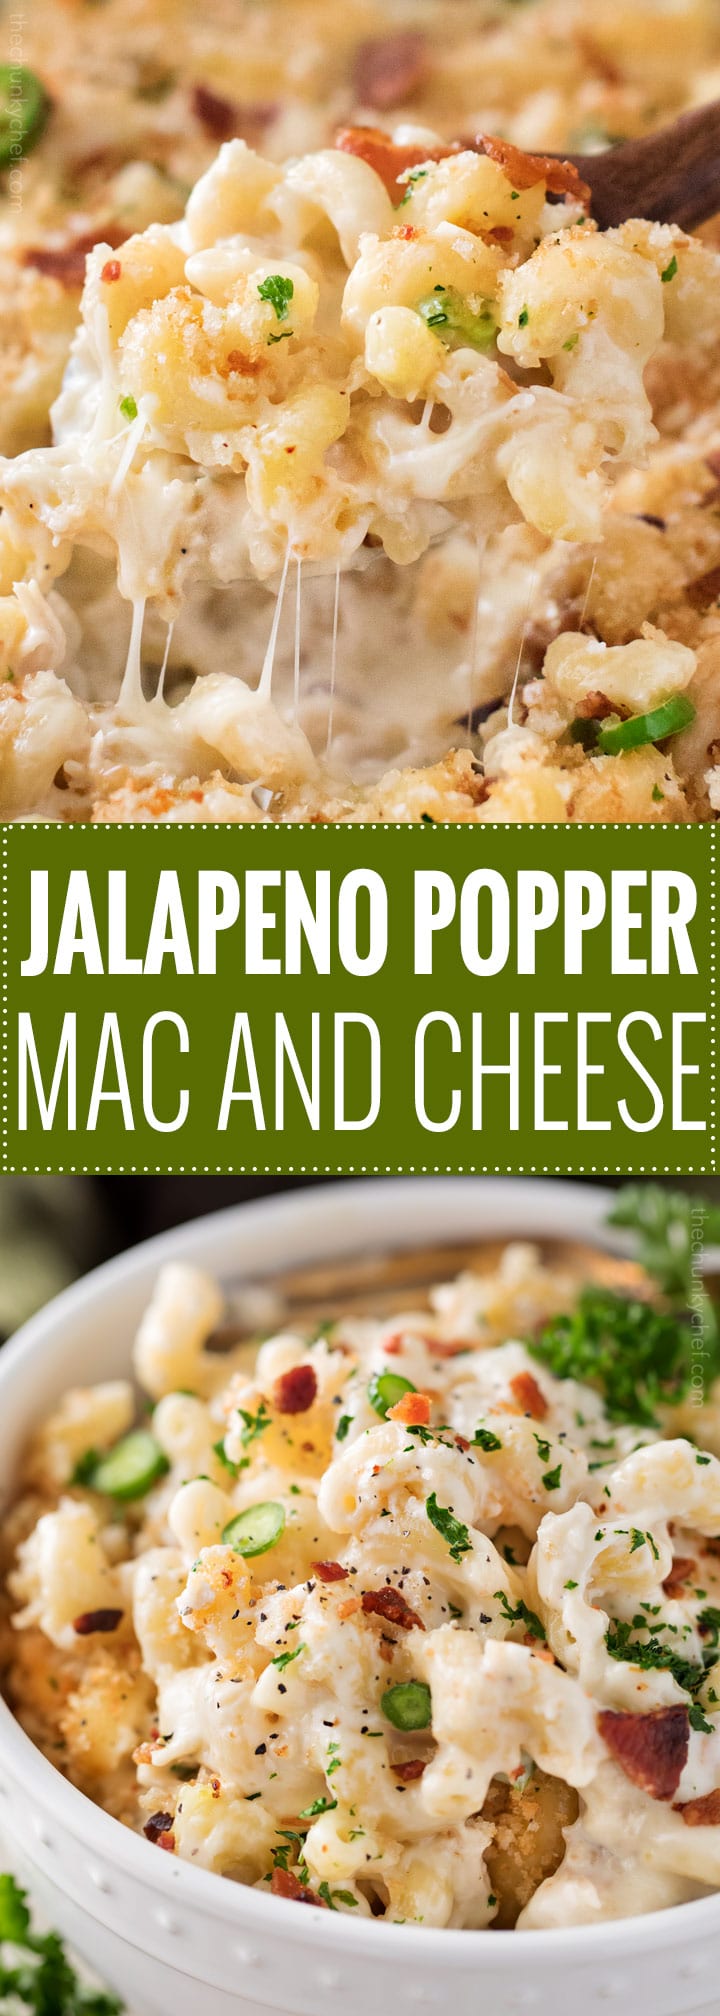 This Jalapeño Popper Mac and Cheese has all the amazing flavors of the wildly popular appetizer, made into an ultra creamy and comforting baked Mac and cheese dish! | #macandcheese #jalapenopopper #comfortfood #macaroniandcheese #recipe